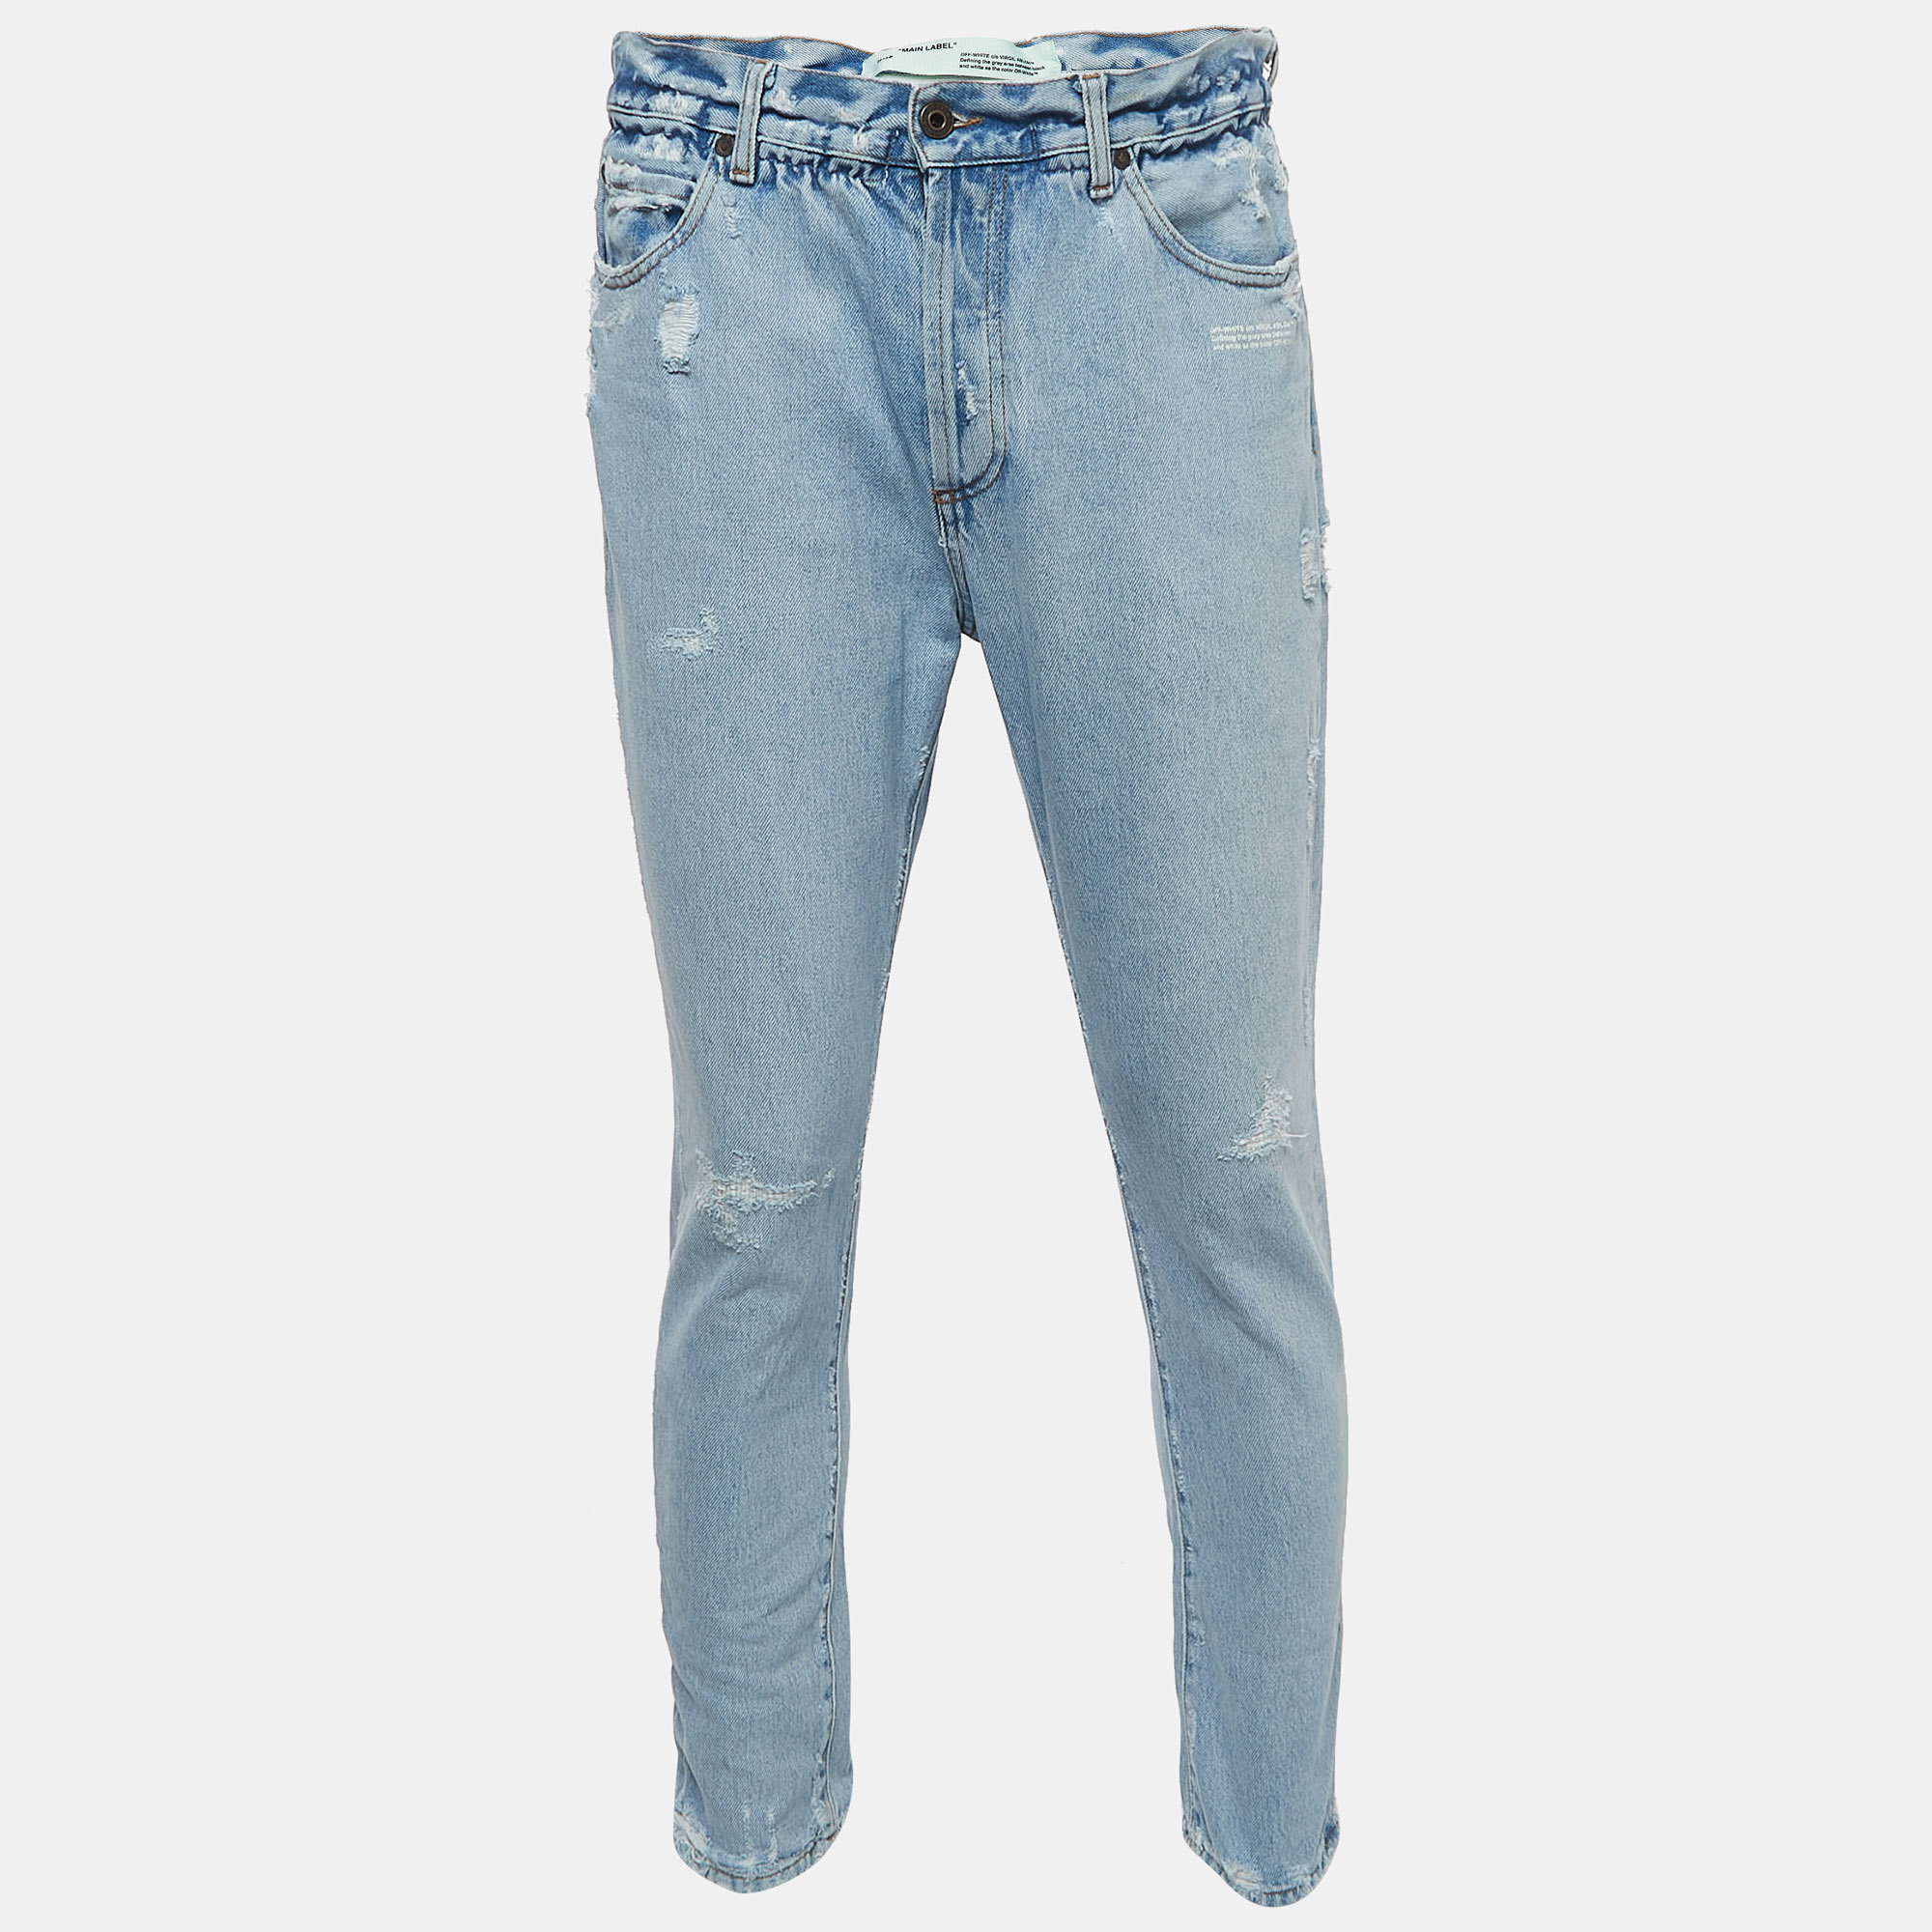 Pre-owned Off-white Light Blue Distressed Denim Buttoned Paperbag Waist Jeans M Waist 30"